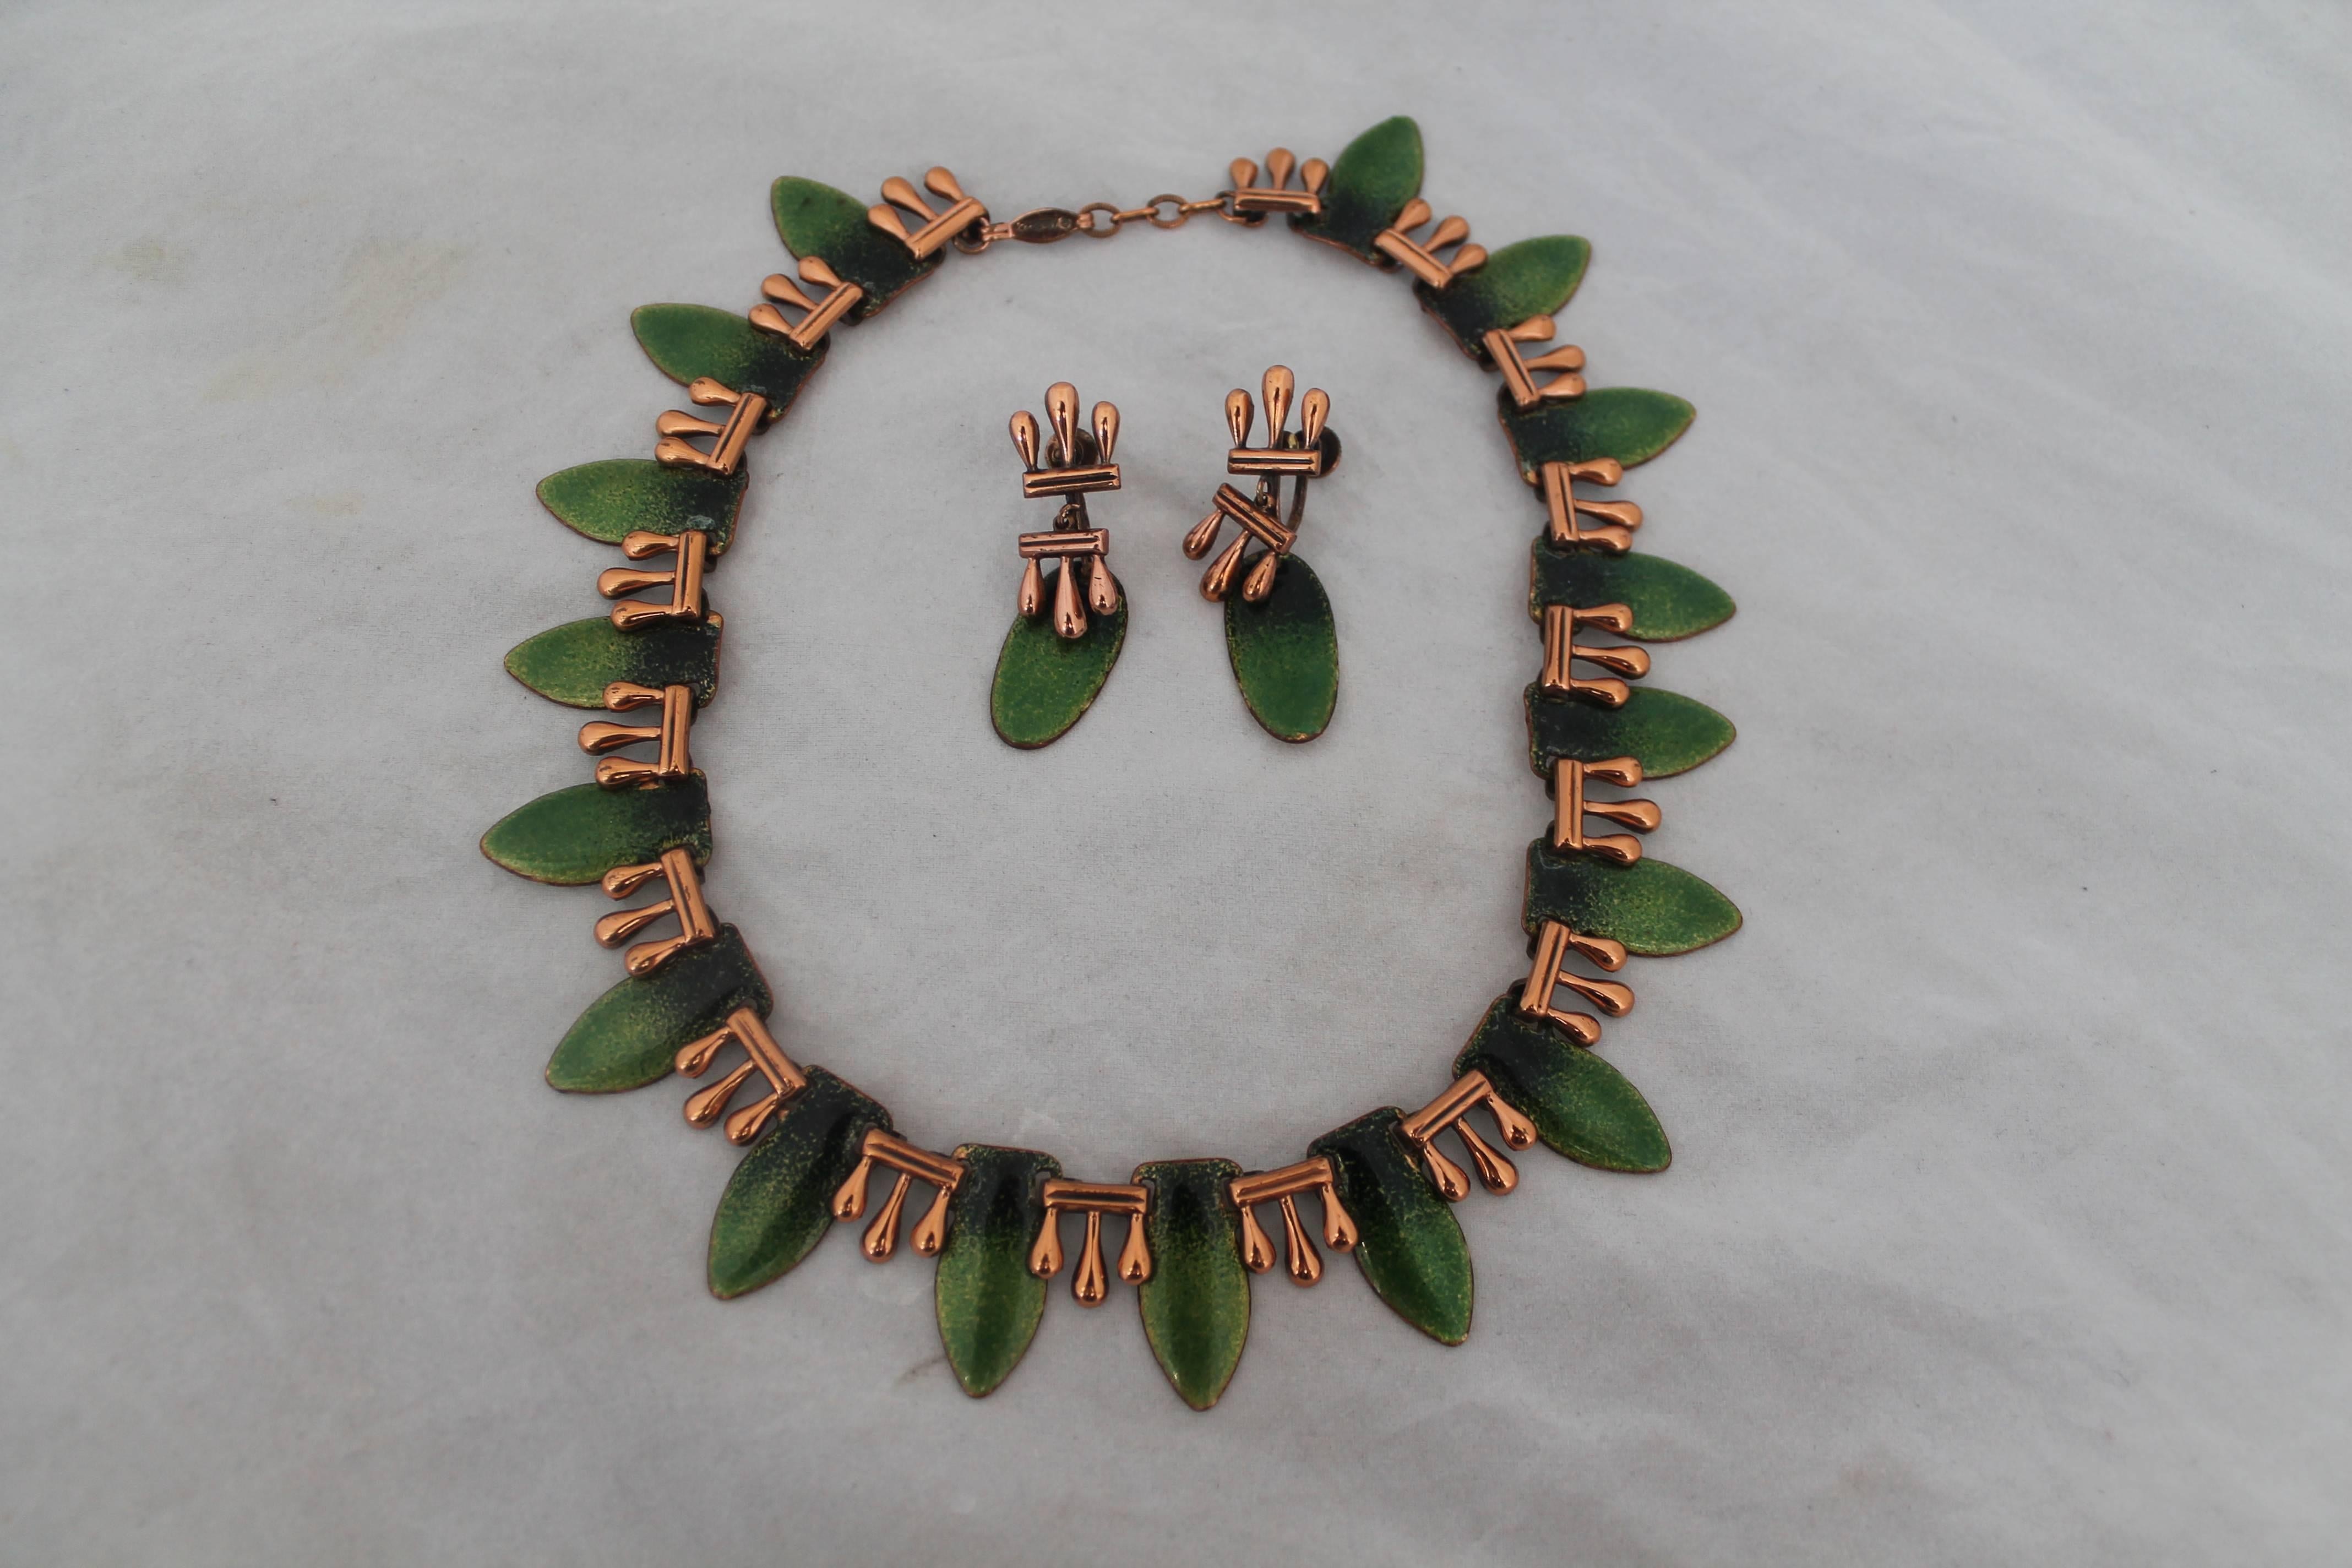 Matisse Renoir Vintage Copper & Green Enamel - 3-Piece Parure - circa 1950's.  This three piece set is in excellent vintage condition.  It is a set consisting of a bracelet, a necklace, and earrings.  It features copper, green enamel, and they are